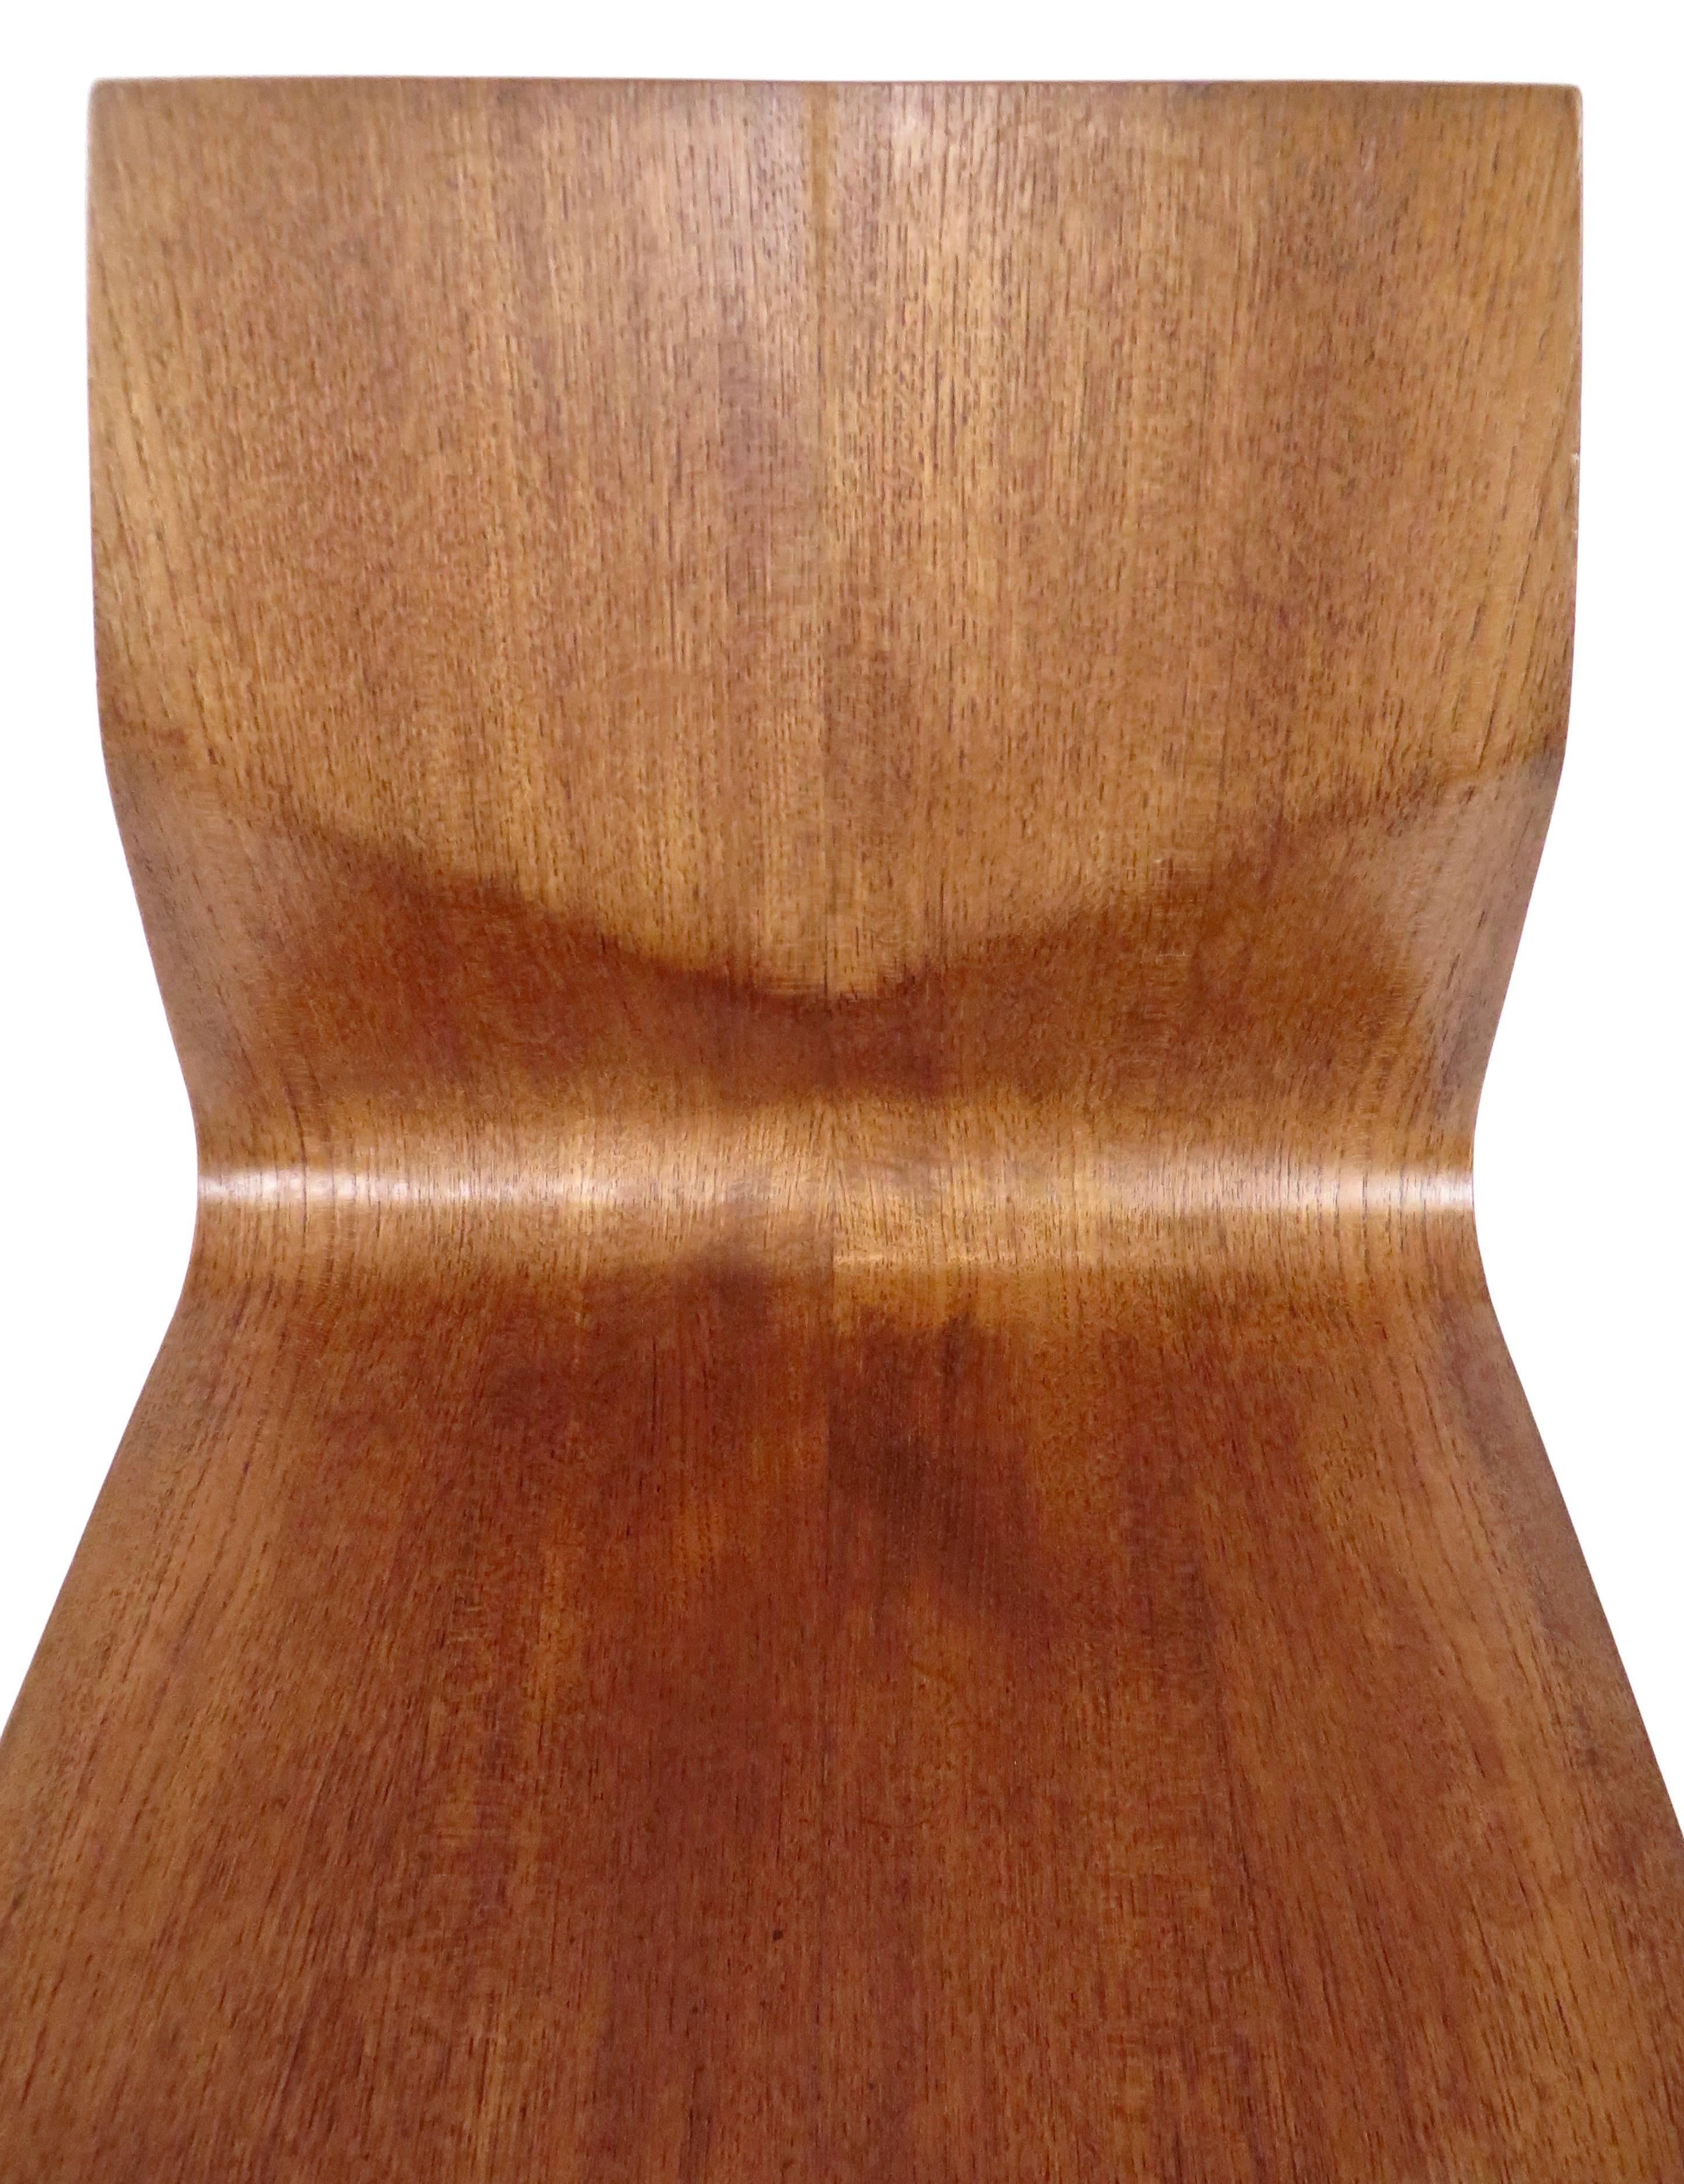 Rene-Jean Caillette French Diamond Chair Molded Plywood 2